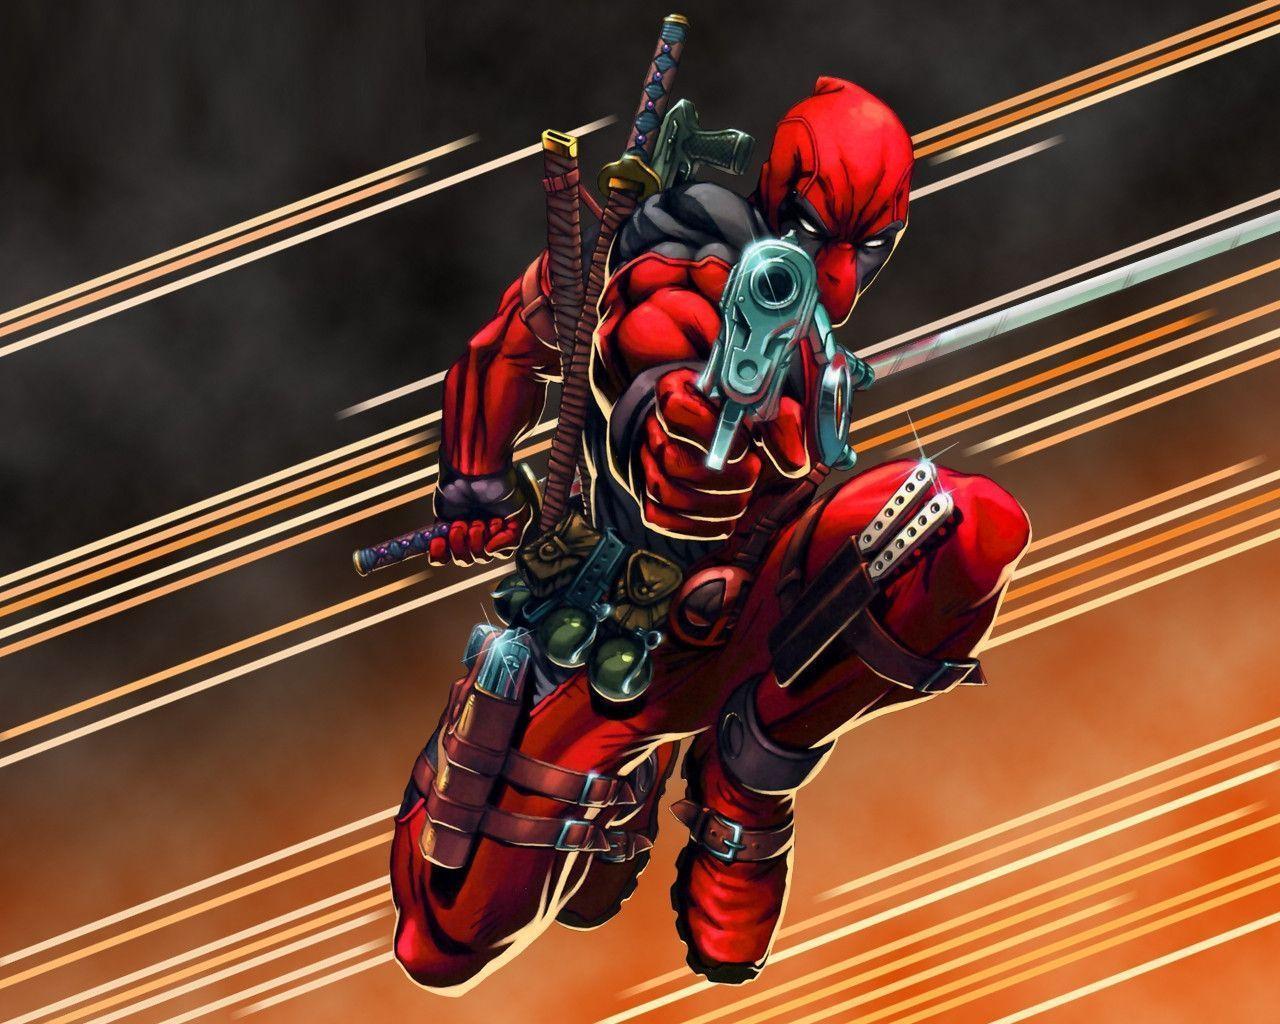 Cable & Deadpool Wallpaper. Cable & Deadpool Background